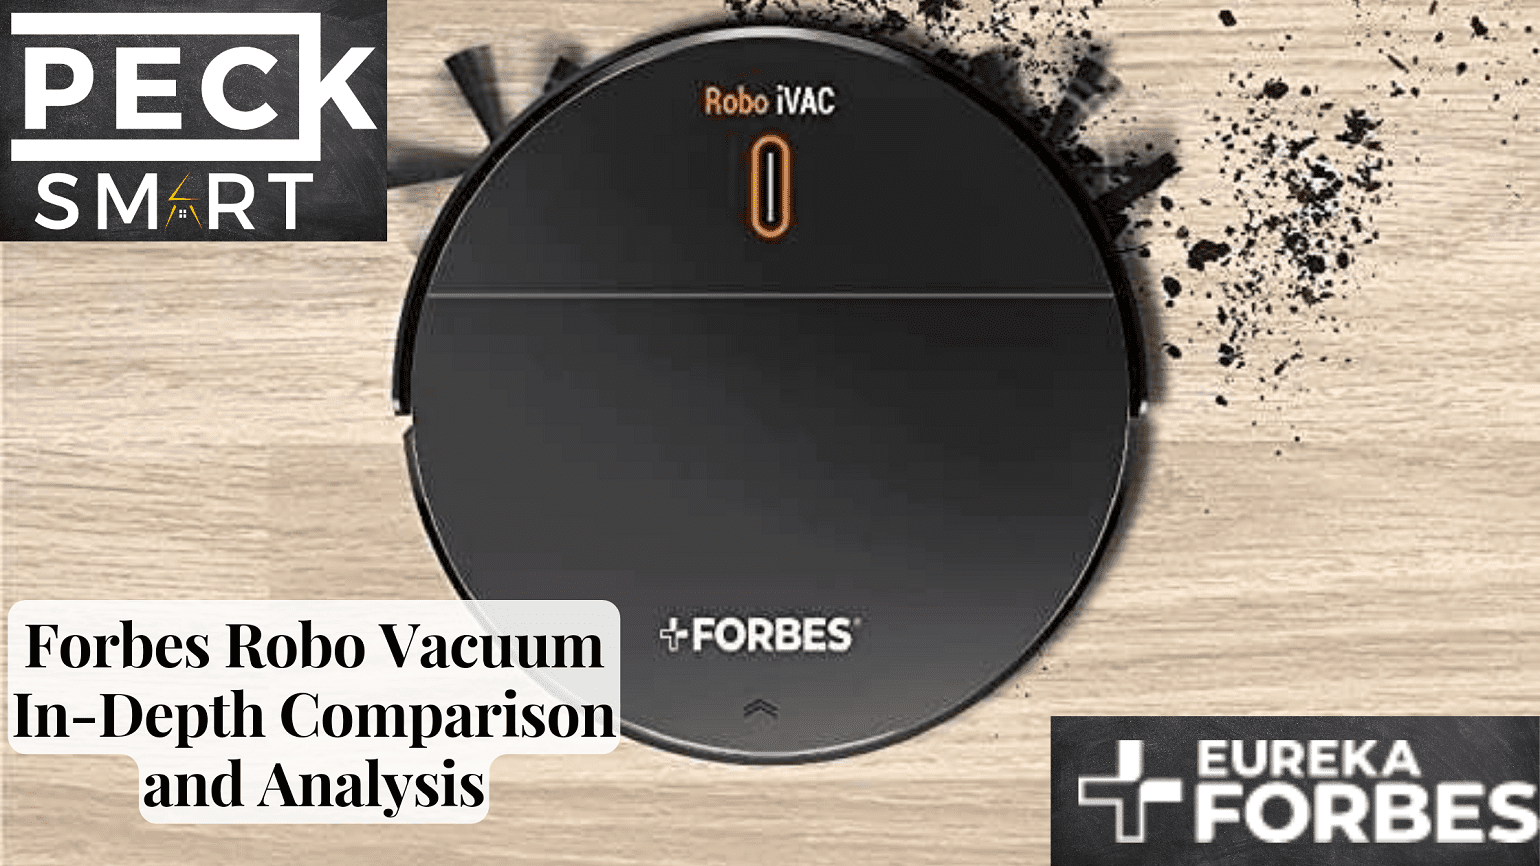 Eureka Forbes Robo Vacuum In-Depth Comparison and Analysis.